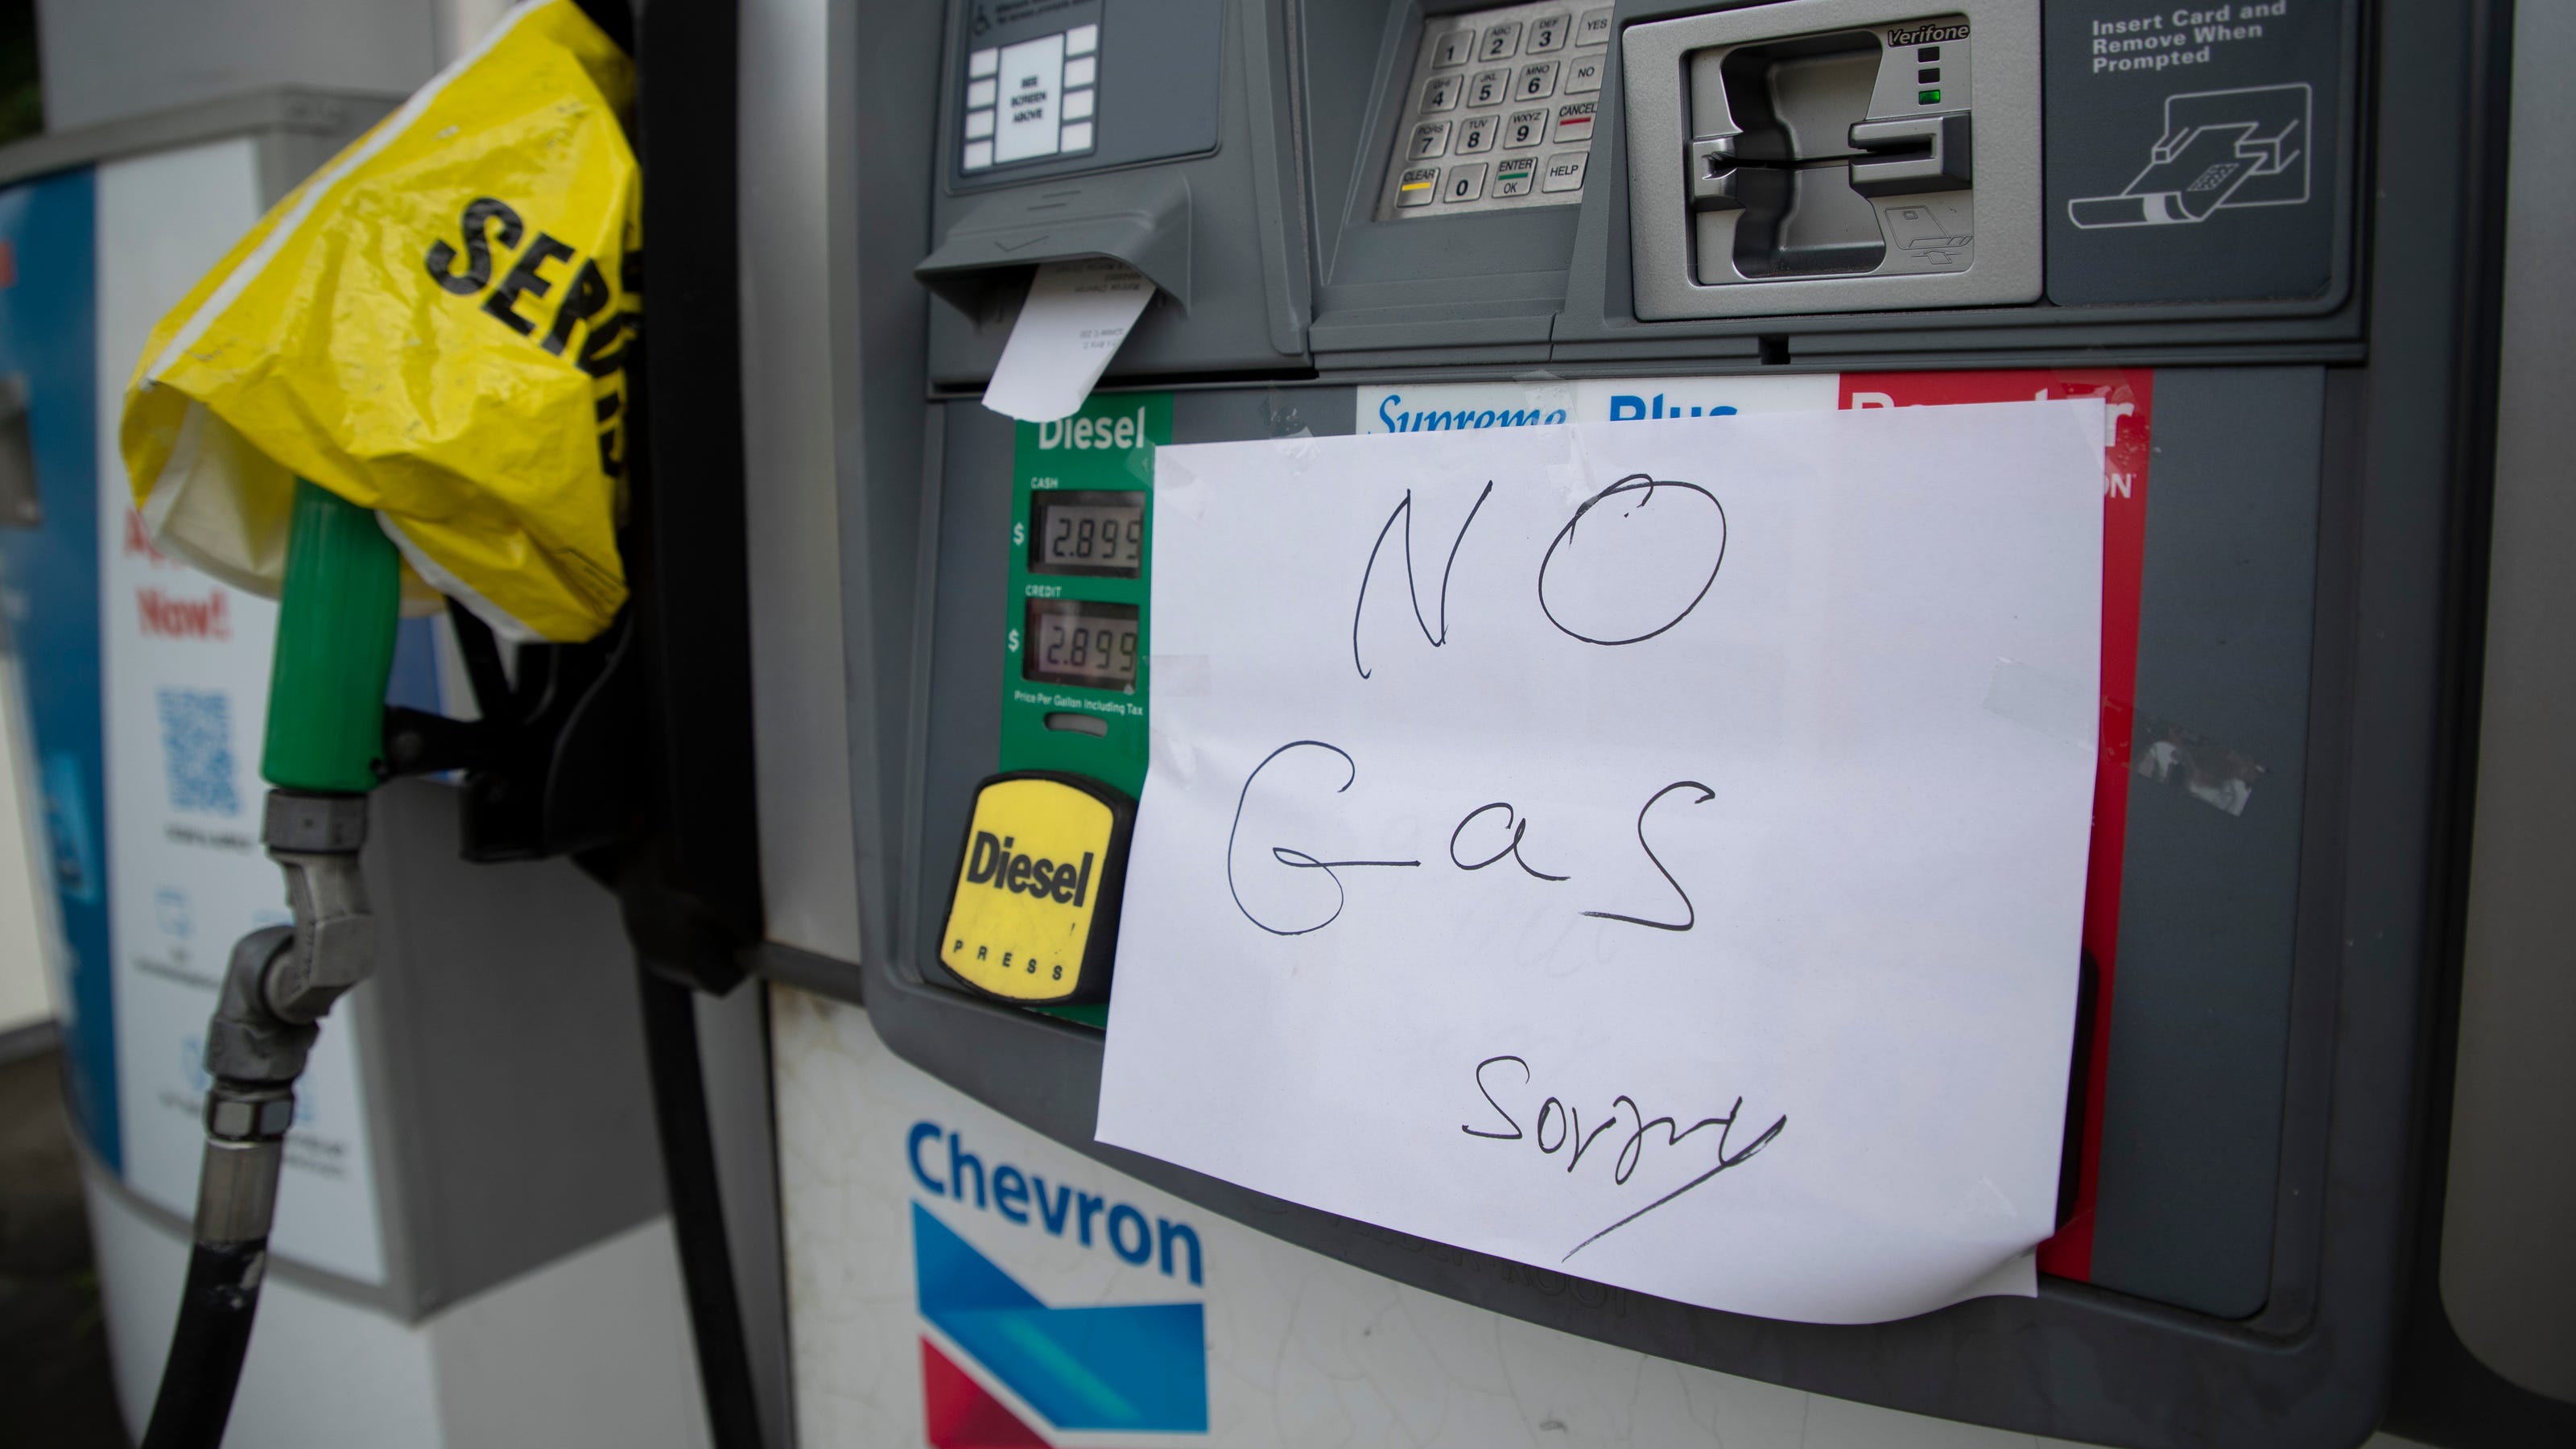 Florida gas shortage Panic buying to blame, industry officials say